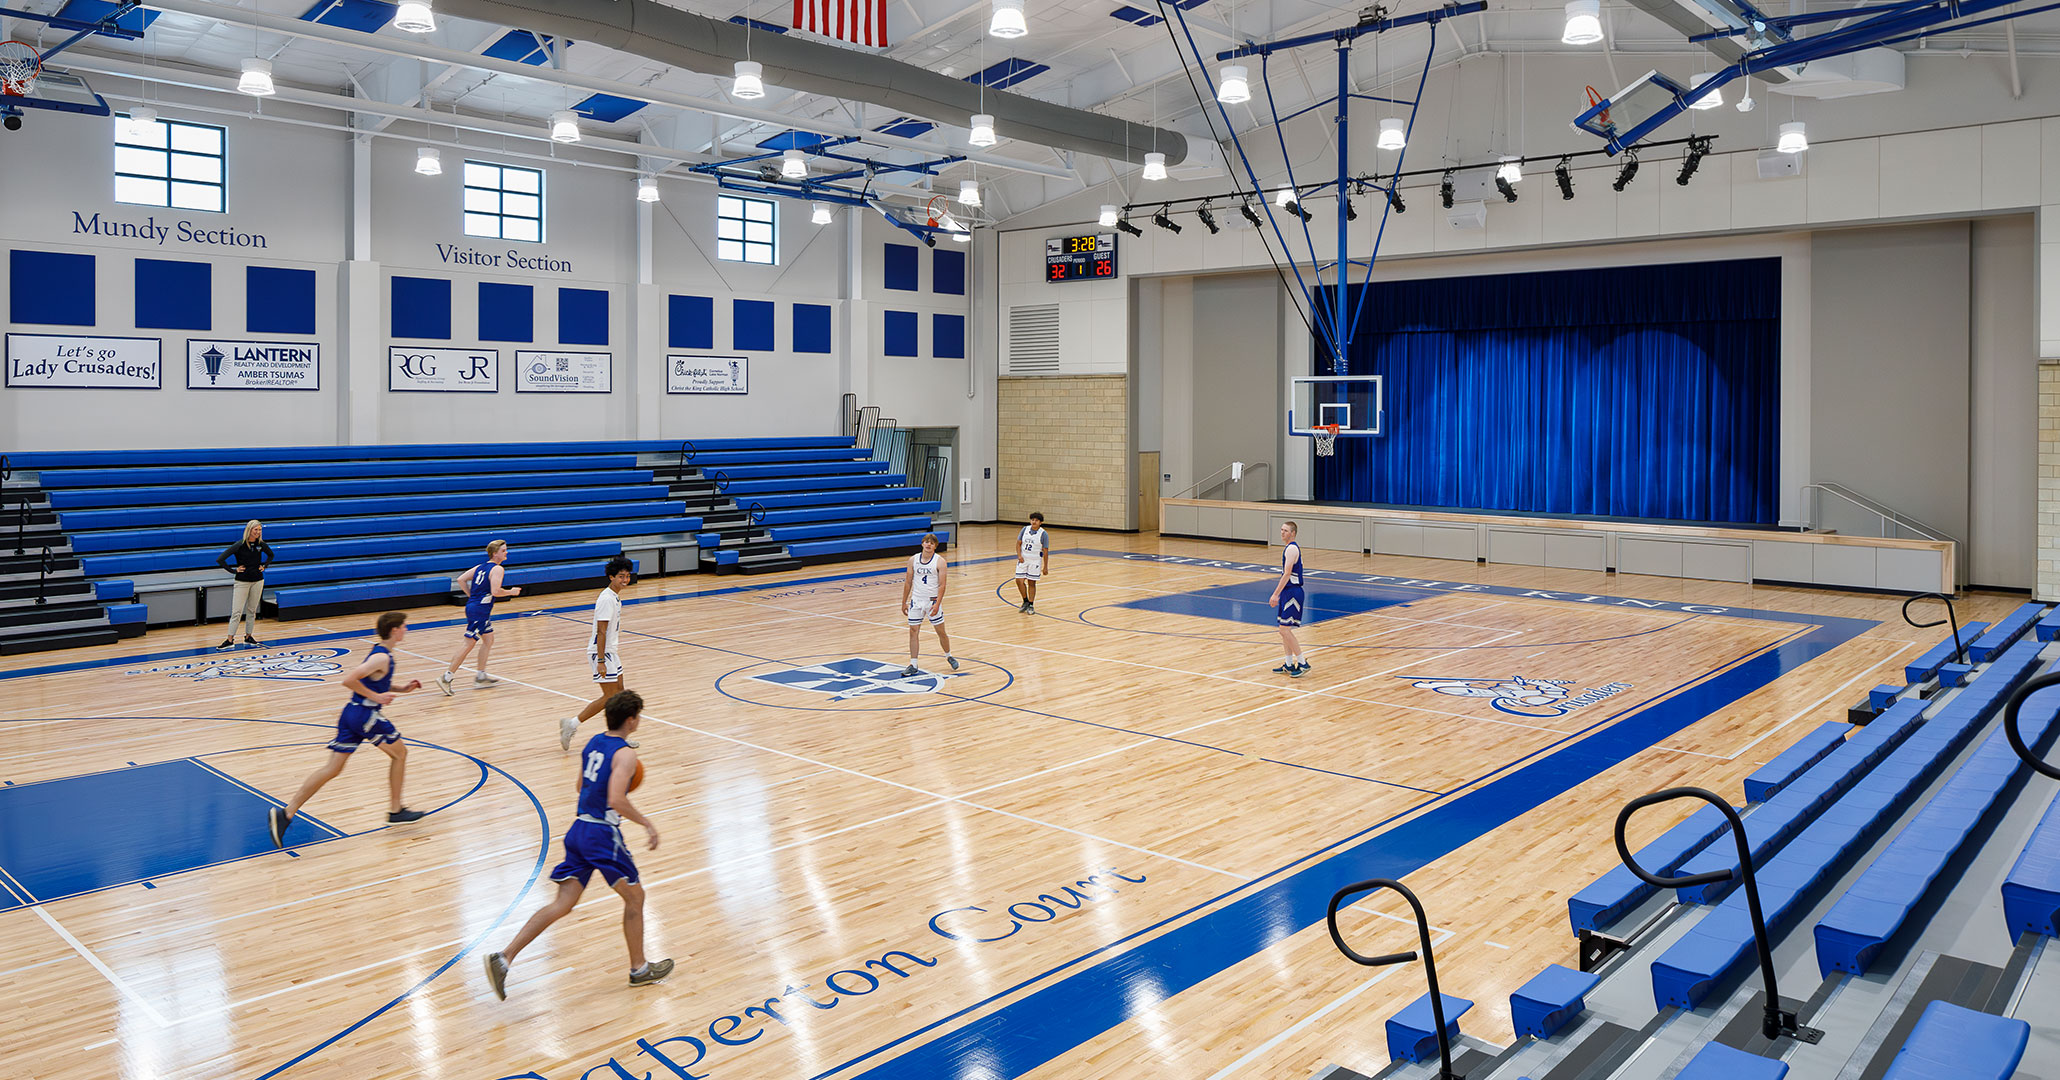 The Charlotte Diocese and Christ the King Catholic High School worked with Boudreaux master planners and architects to design the school’s basketball gymnasium.